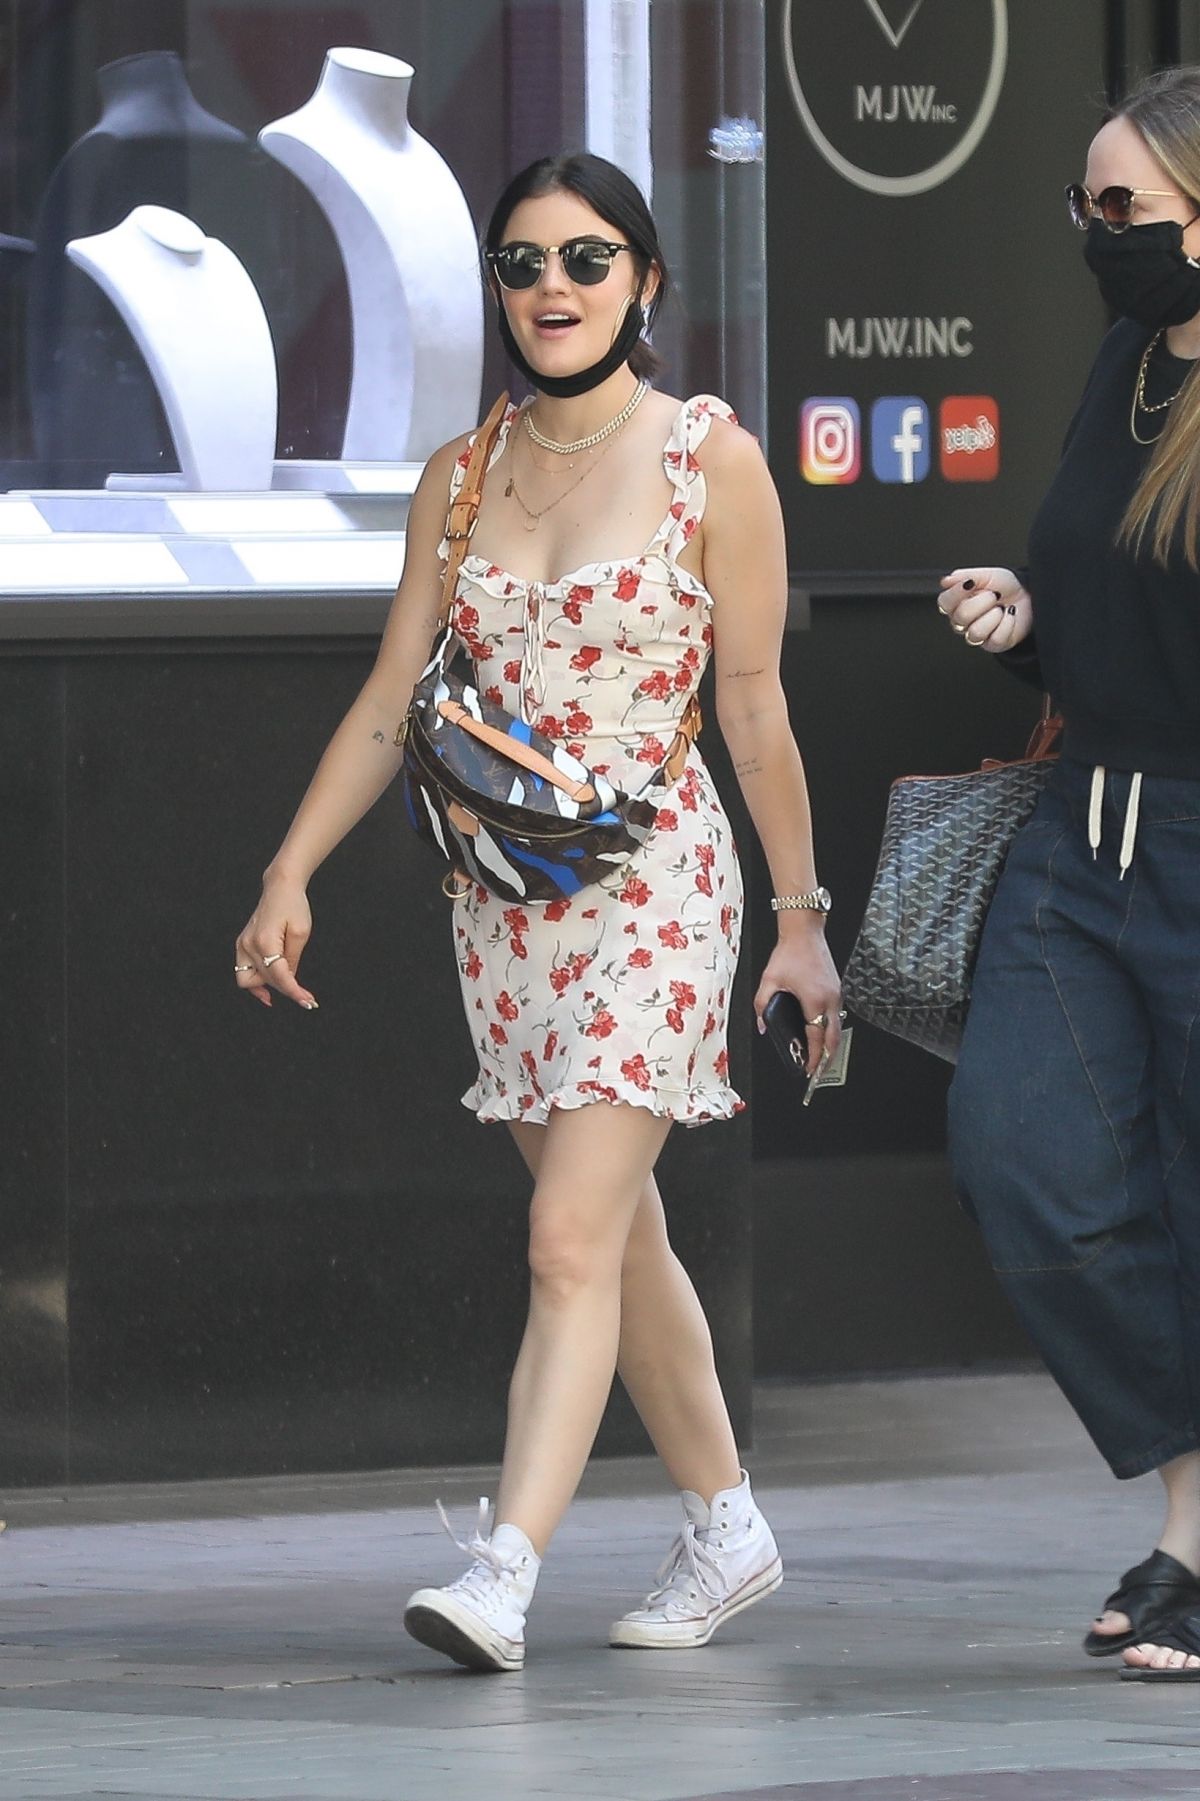 Lucy Hale Los Angeles June 10, 2020 – Star Style